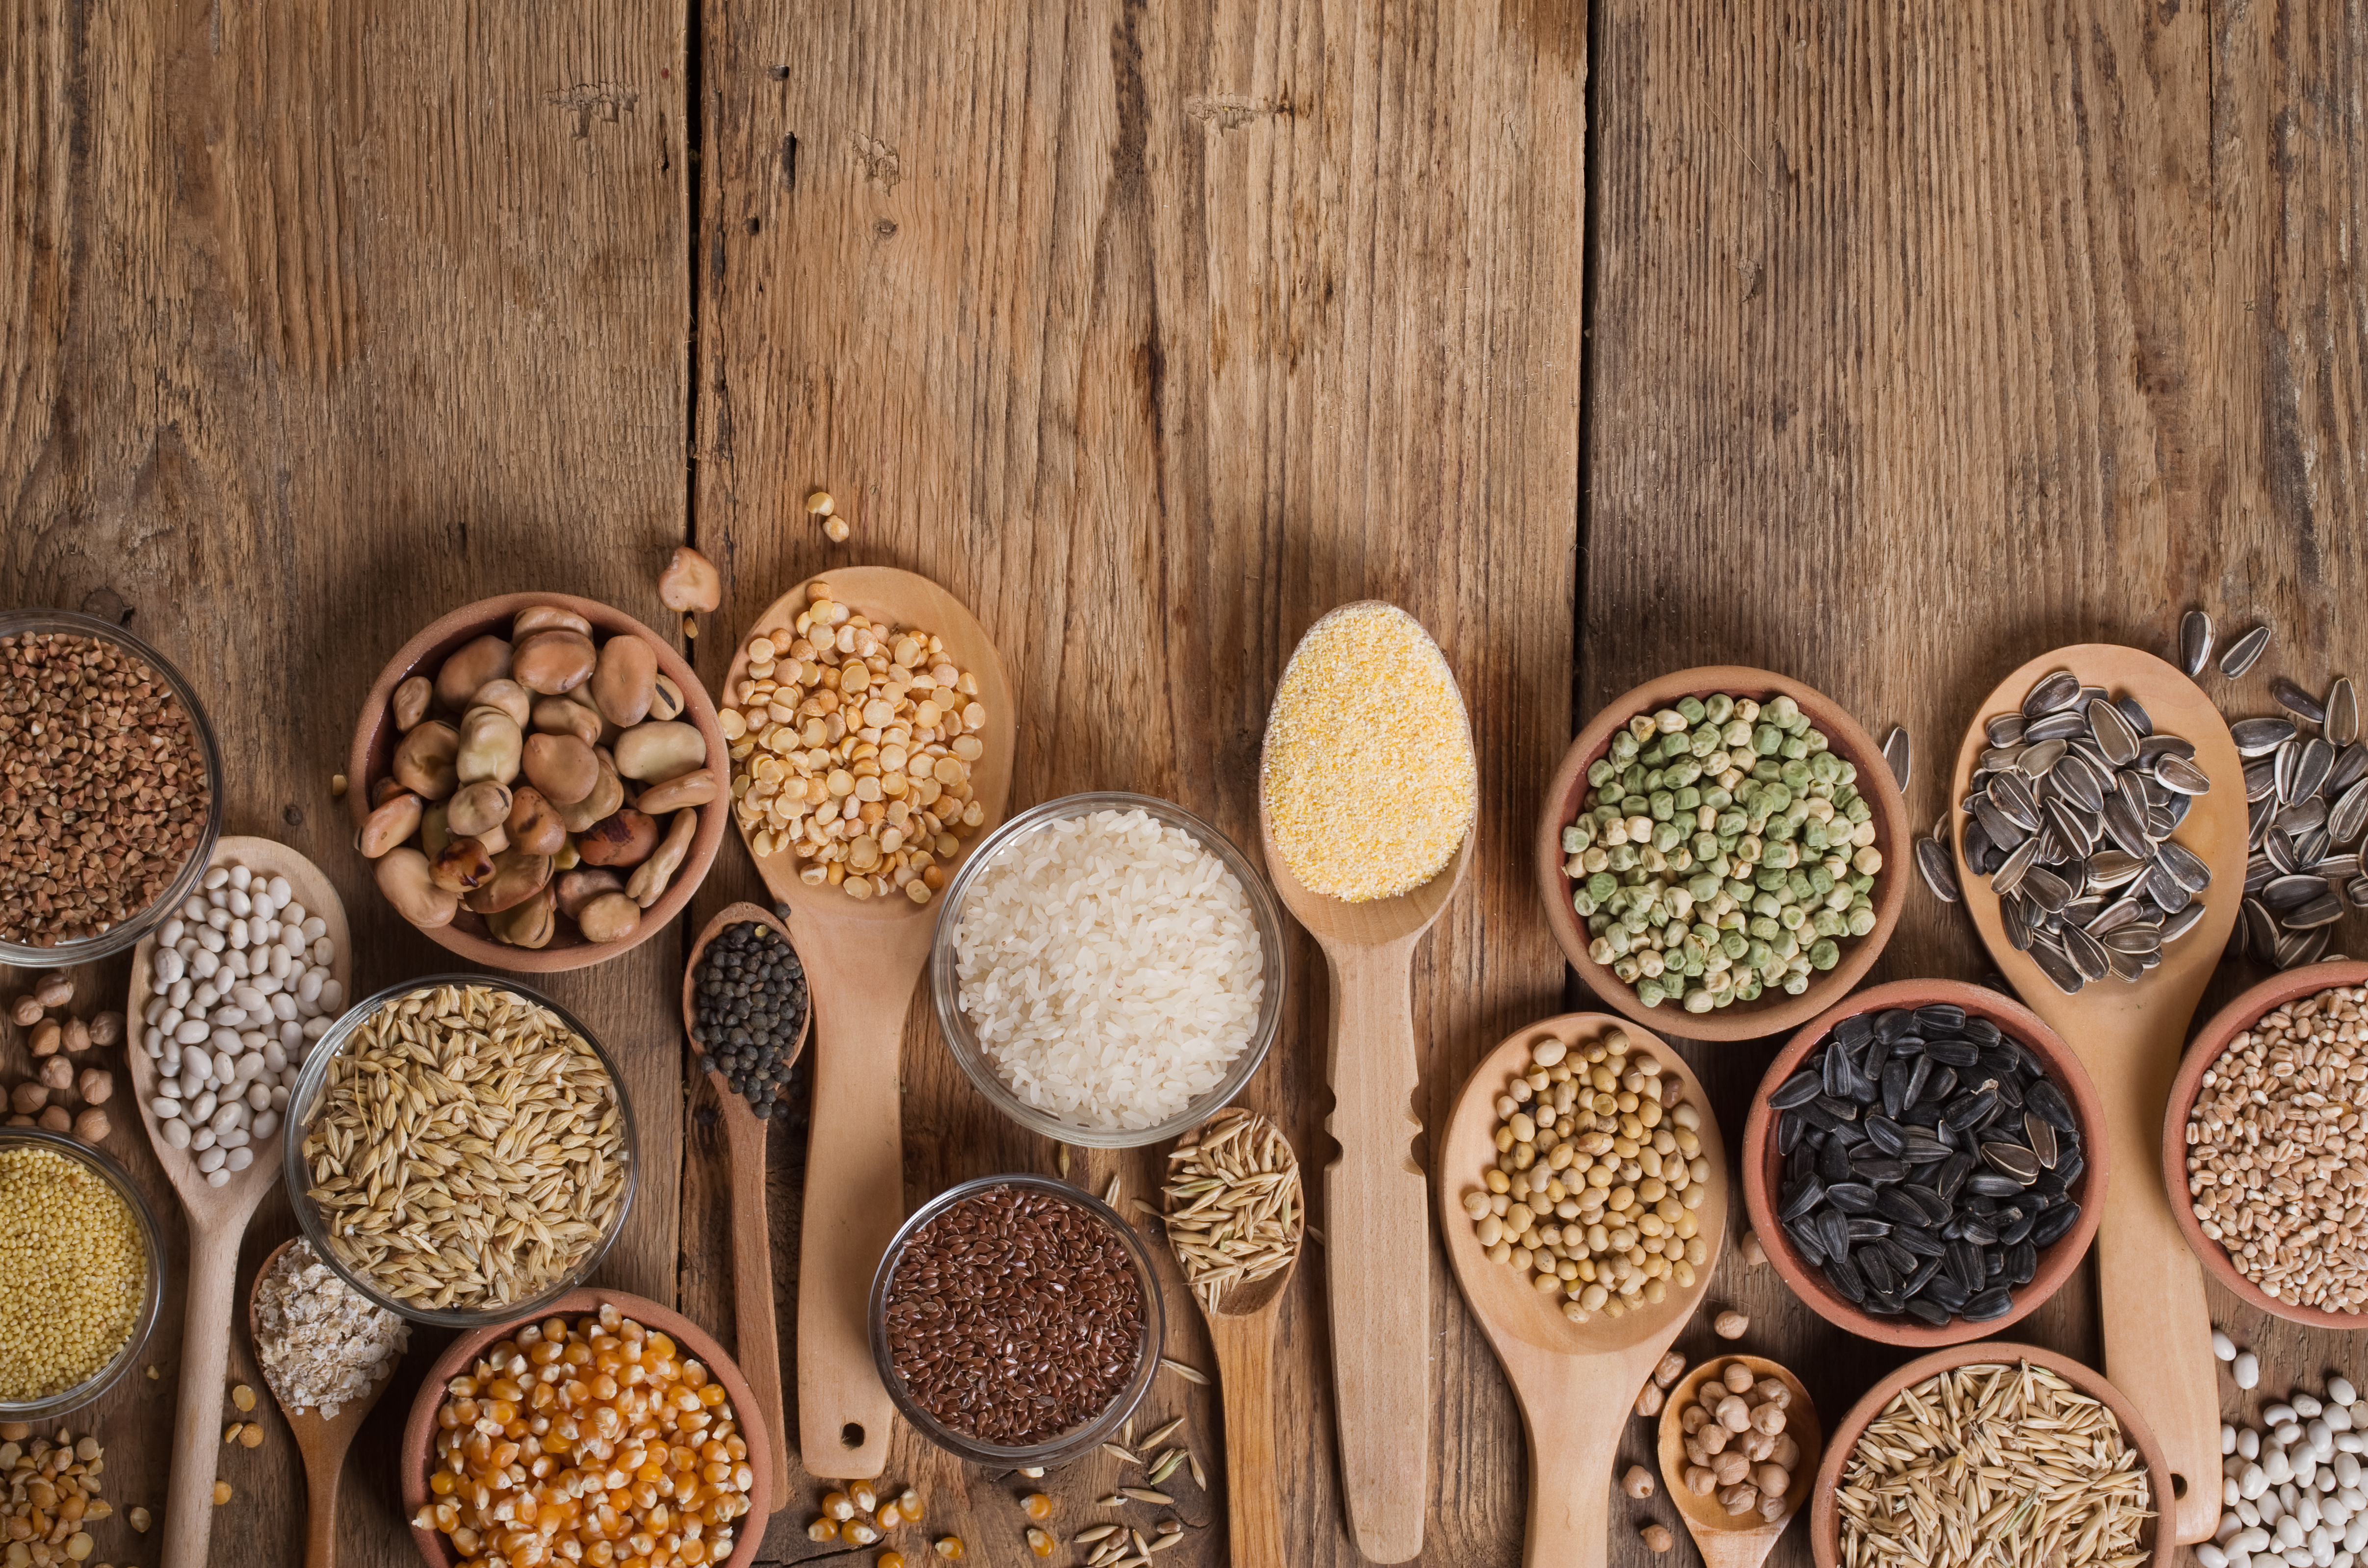 Priority Health Personal Wellness Whole Grains Dietitian's Guide to Whole Grains